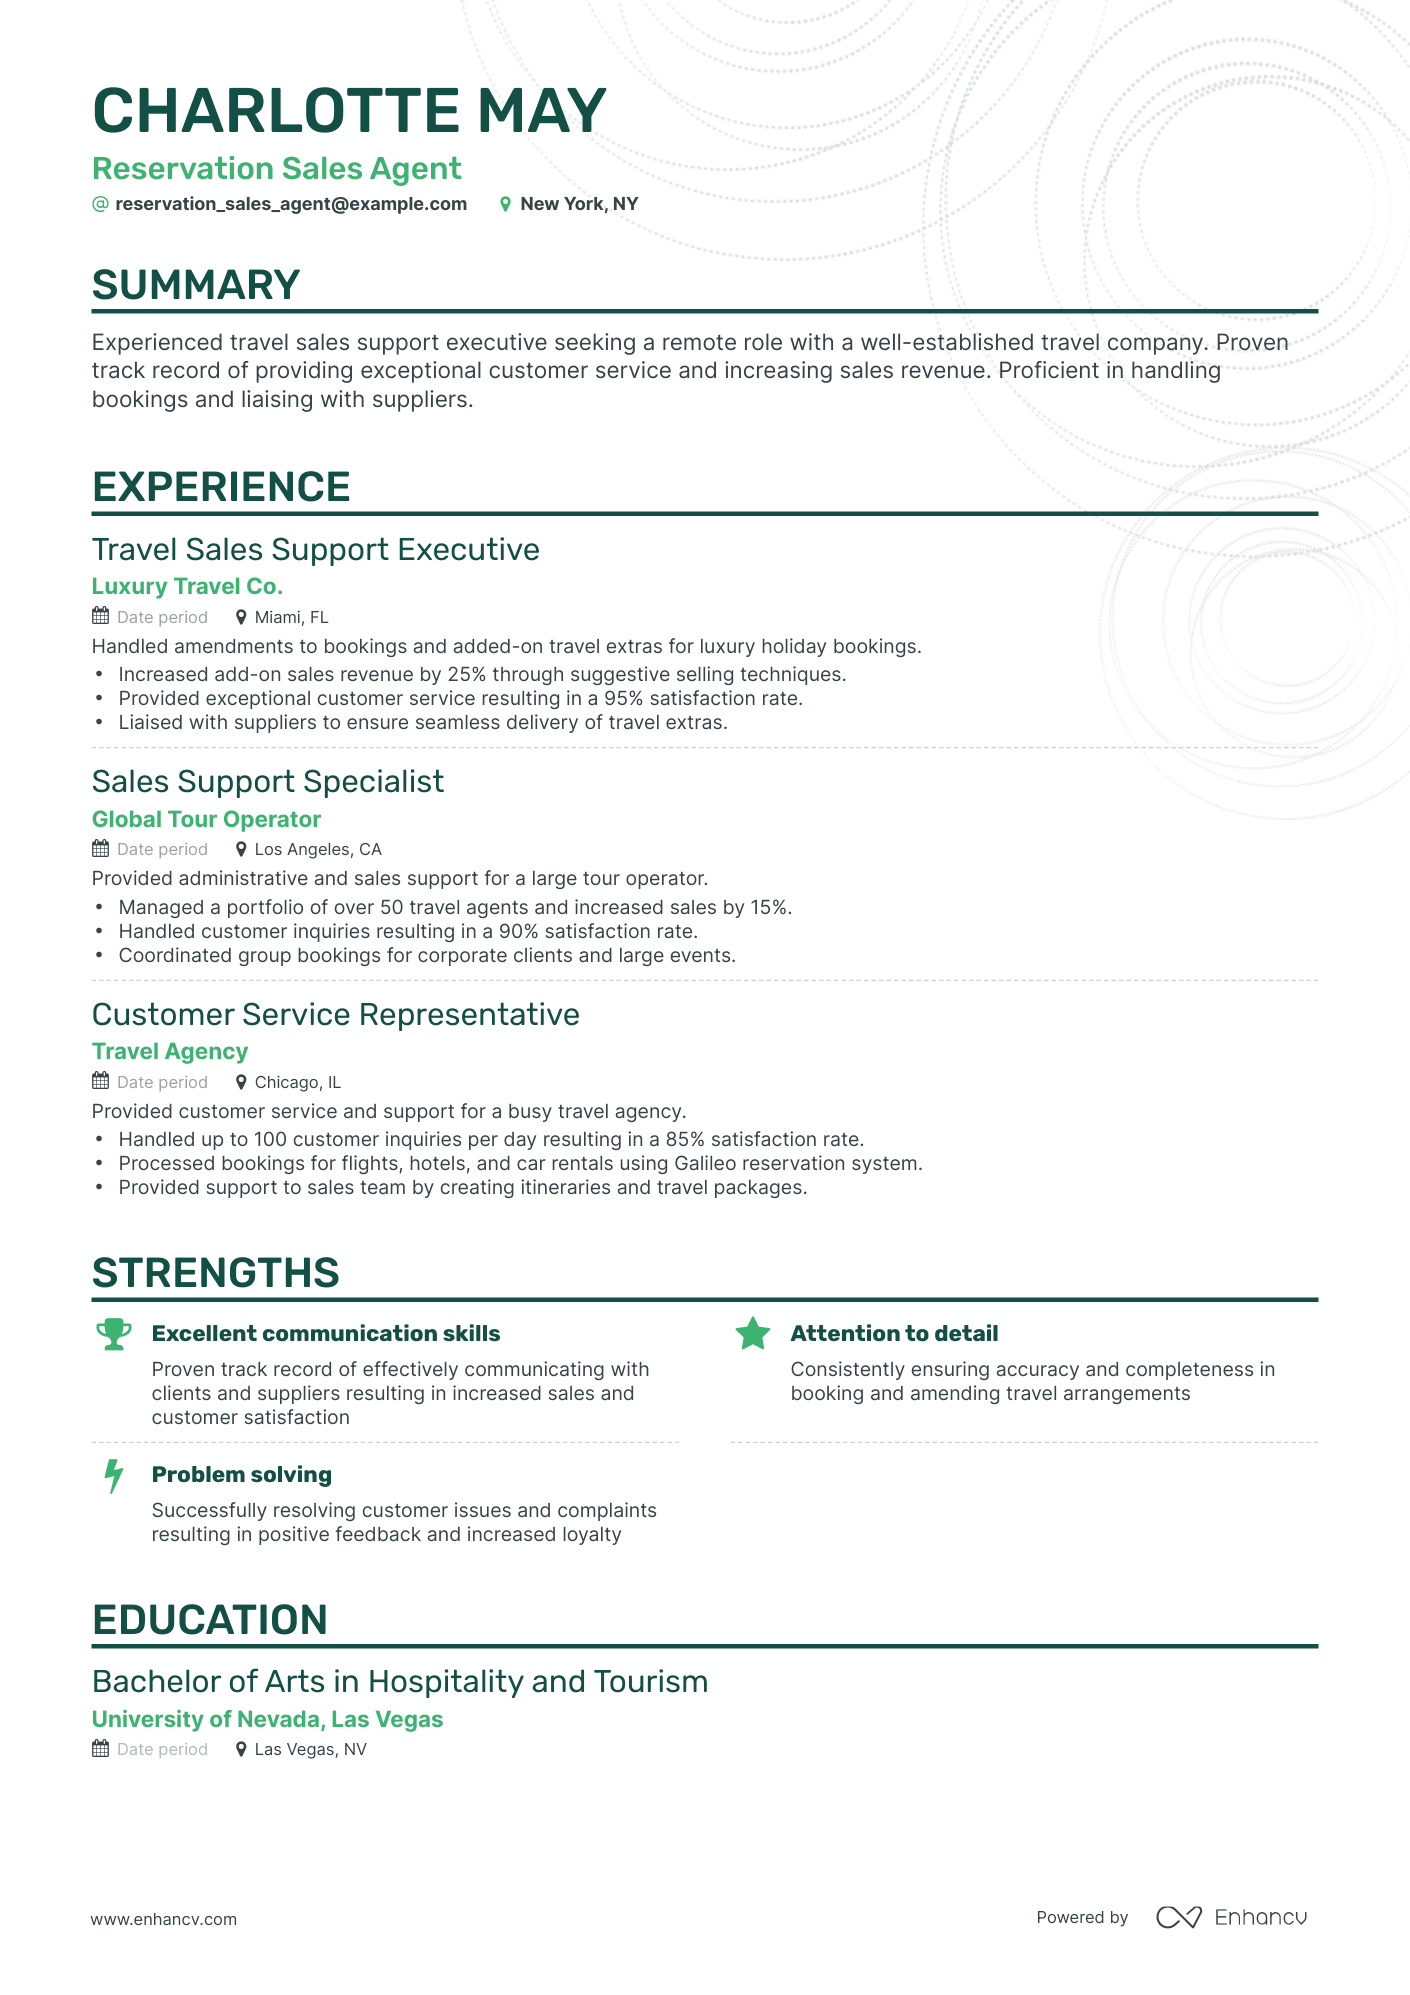 Classic Reservation Sales Agent Resume Template